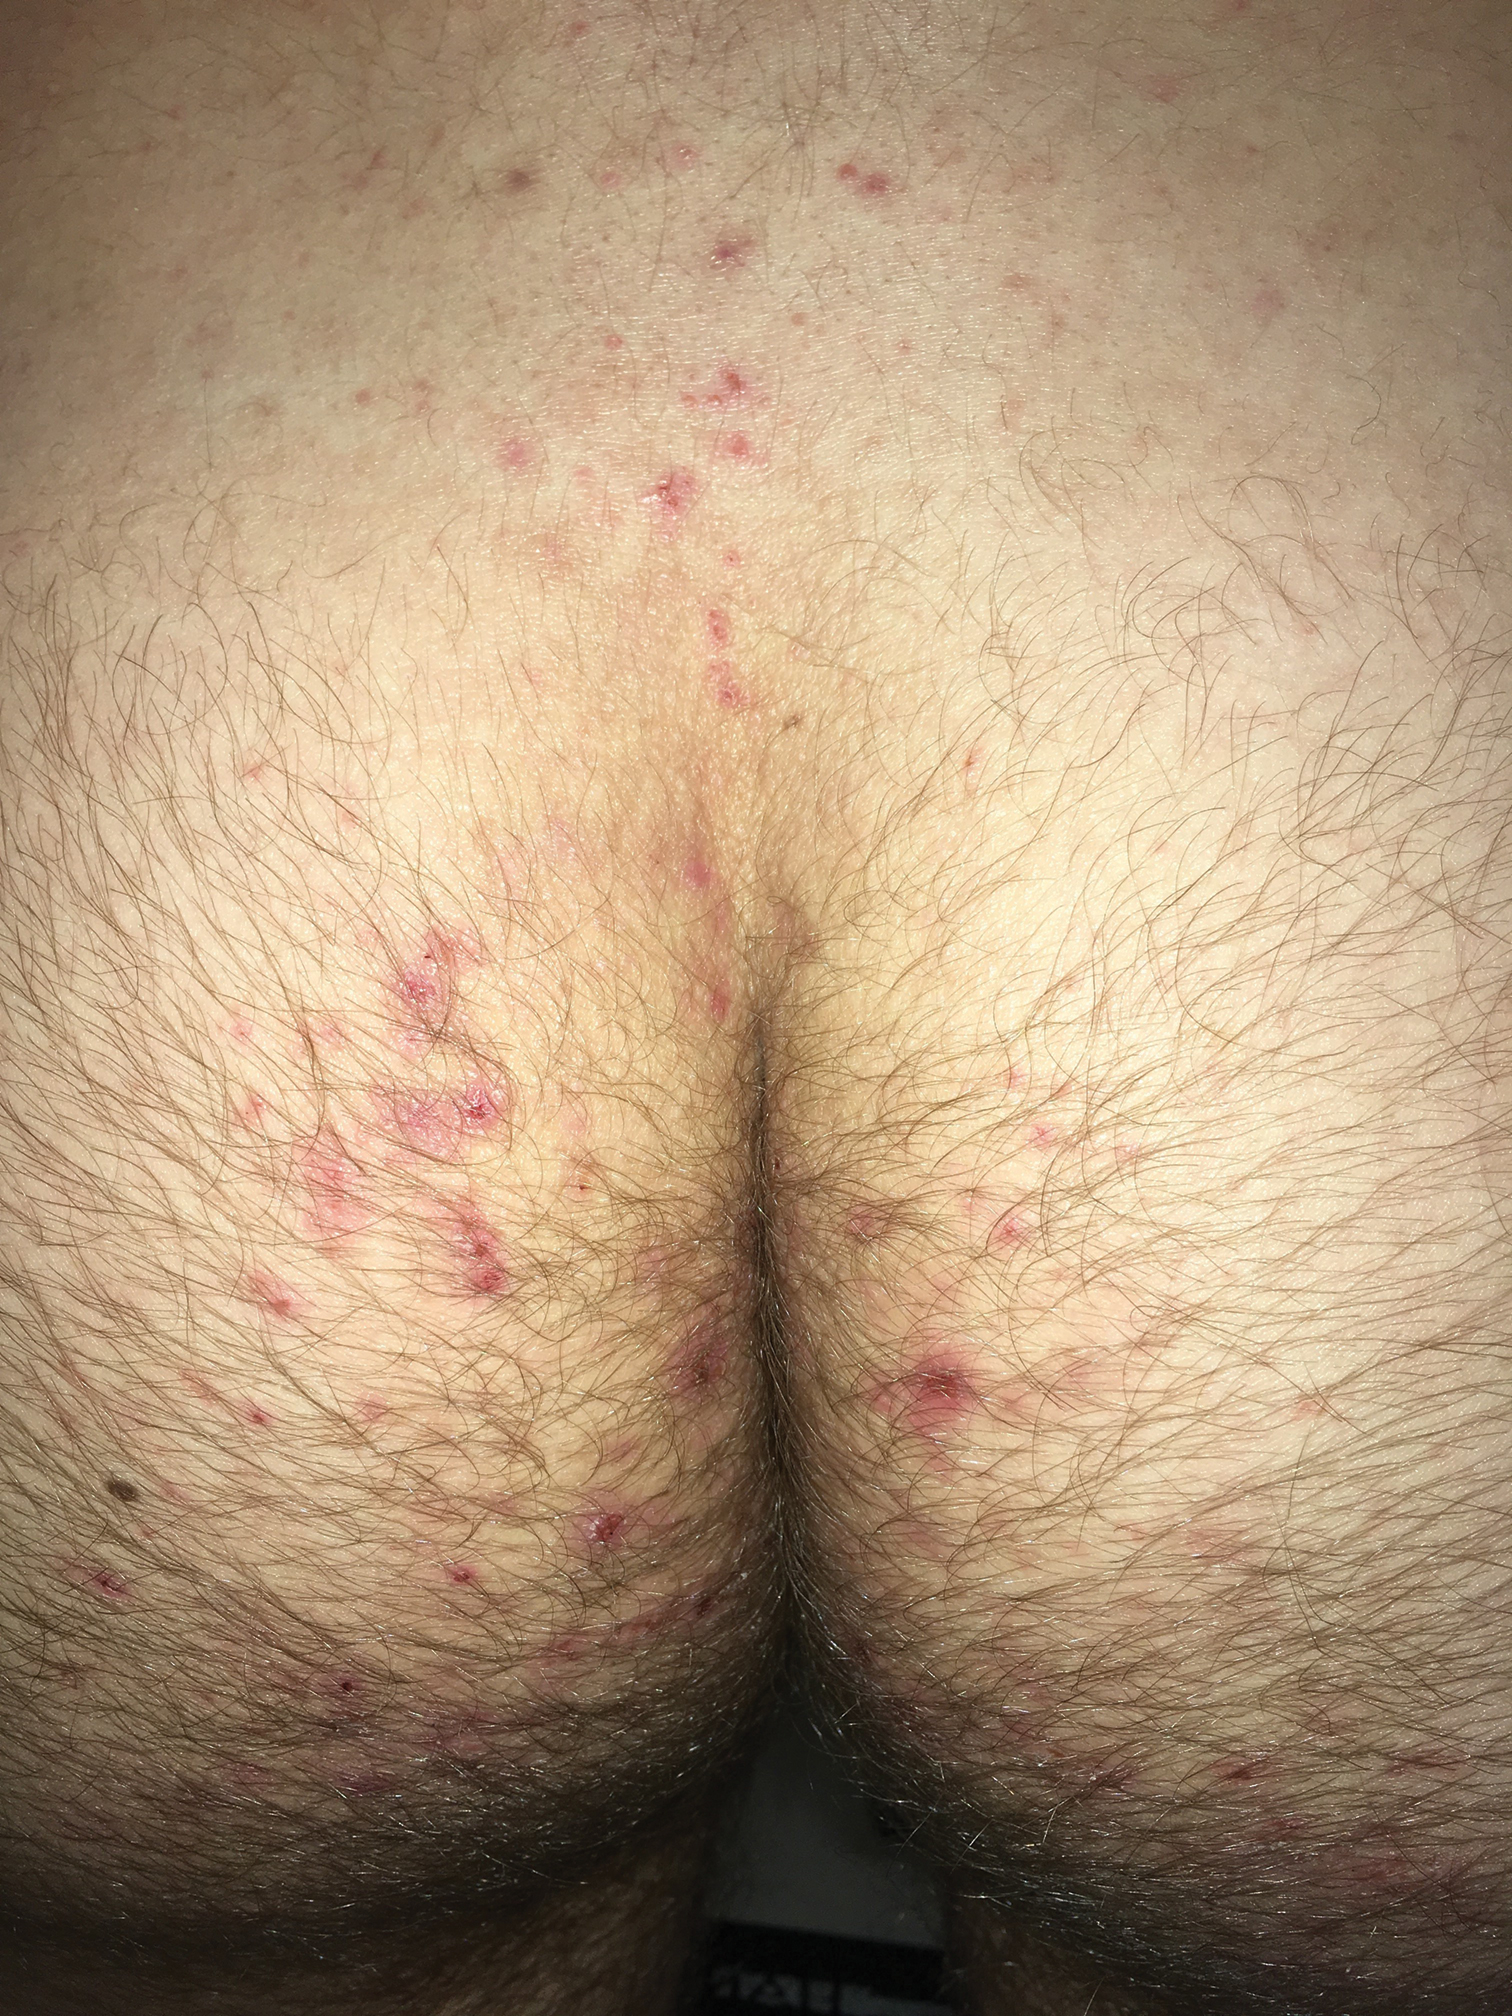 Persistent Pruritic Papules On The Buttocks Mdedge Dermatology